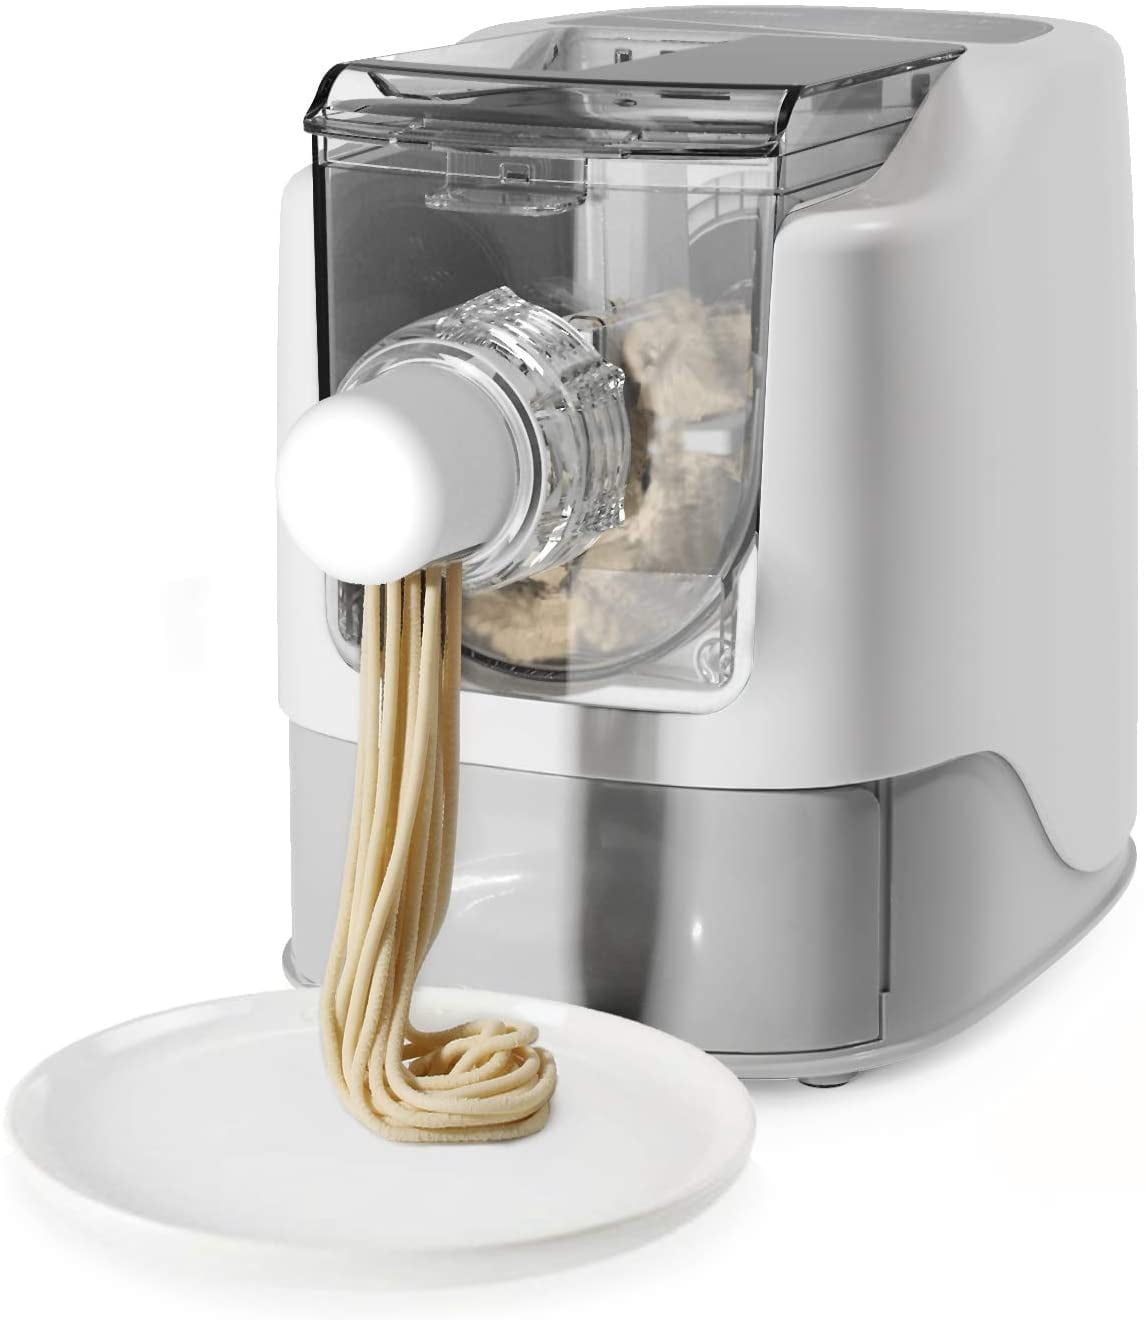 Razorri Electric Pasta and Ramen Noodle Maker - Make 1 Pound of Homemade  Noodles in 10 Minutes or Less - 13 Noodle Shapes to Choose - Make Spaghetti,  Fettuccine, Penne, Macaroni, or Dumpling Wrappers 